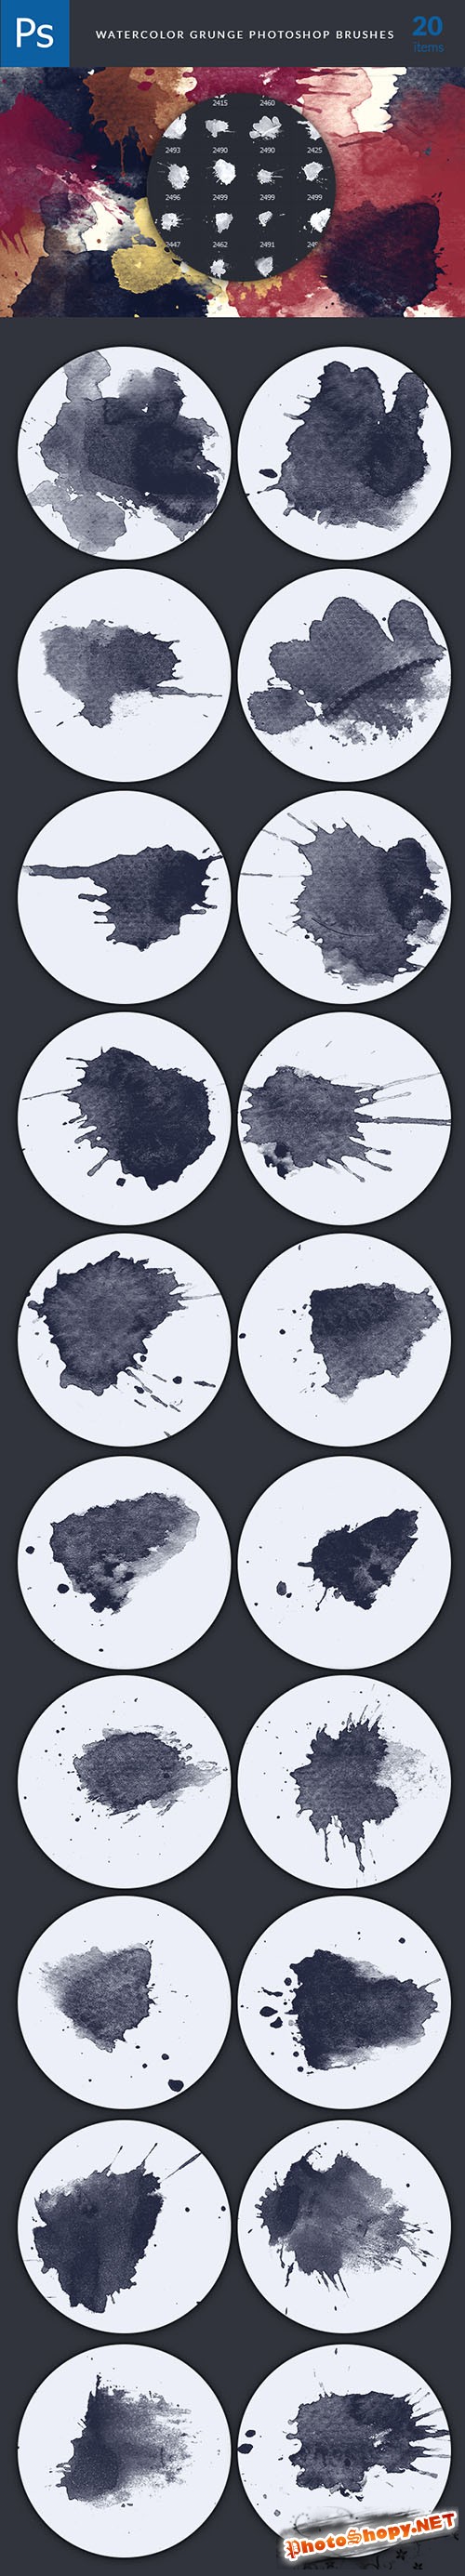 Watercolor Grunge Photoshop Brushes Pack 2